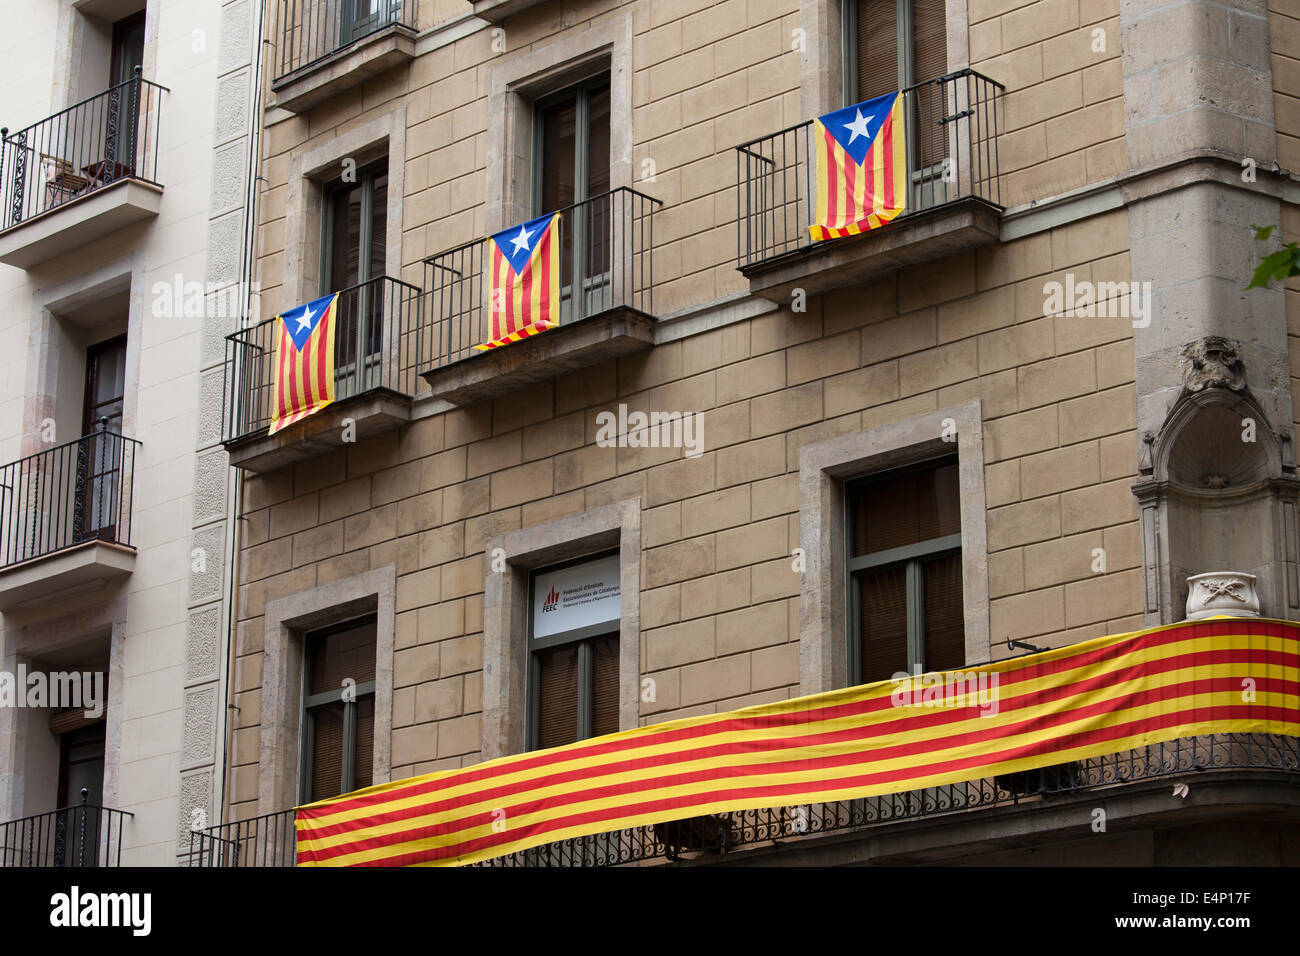 Flag of Catalonia called Estelada, Catalan flags on a building balconies in Barcelona, Catalonia, Spain. Stock Photo